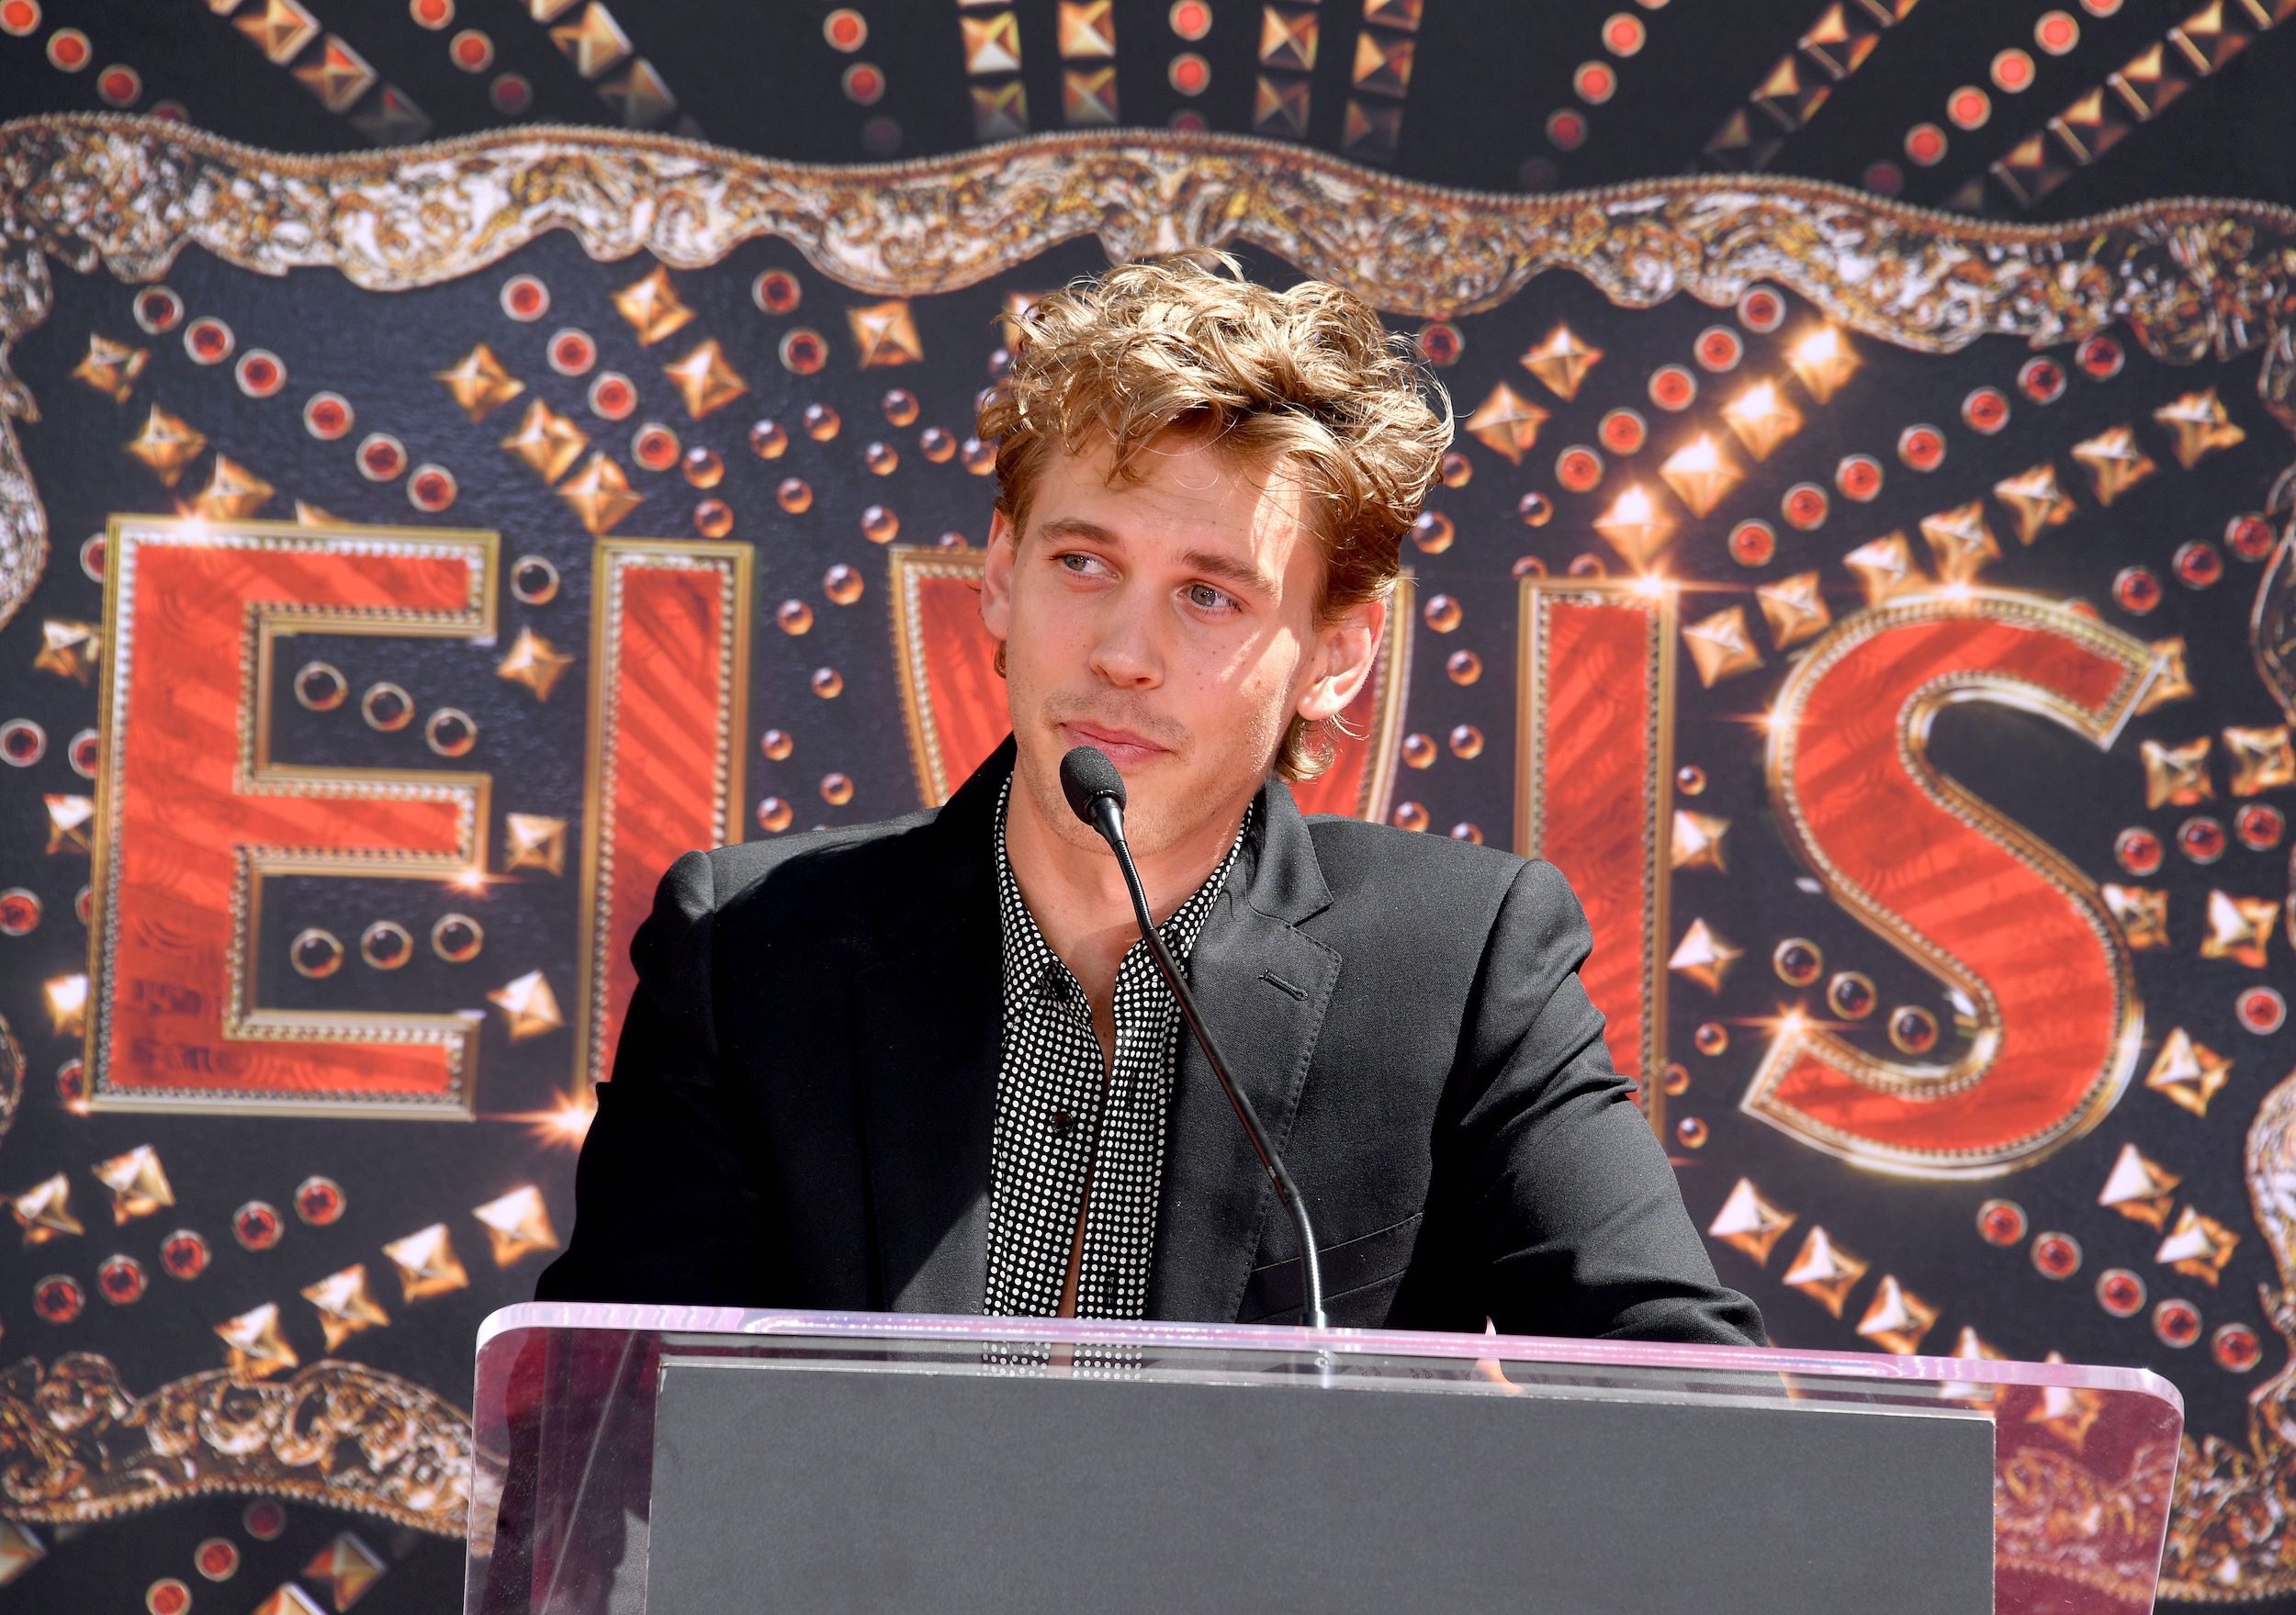 Austin Butler speaks at the handprint ceremony honoring Priscilla Presley, Lisa Marie Presley, and Riley Keough at TCL Chinese Theatre in Los Angeles, California